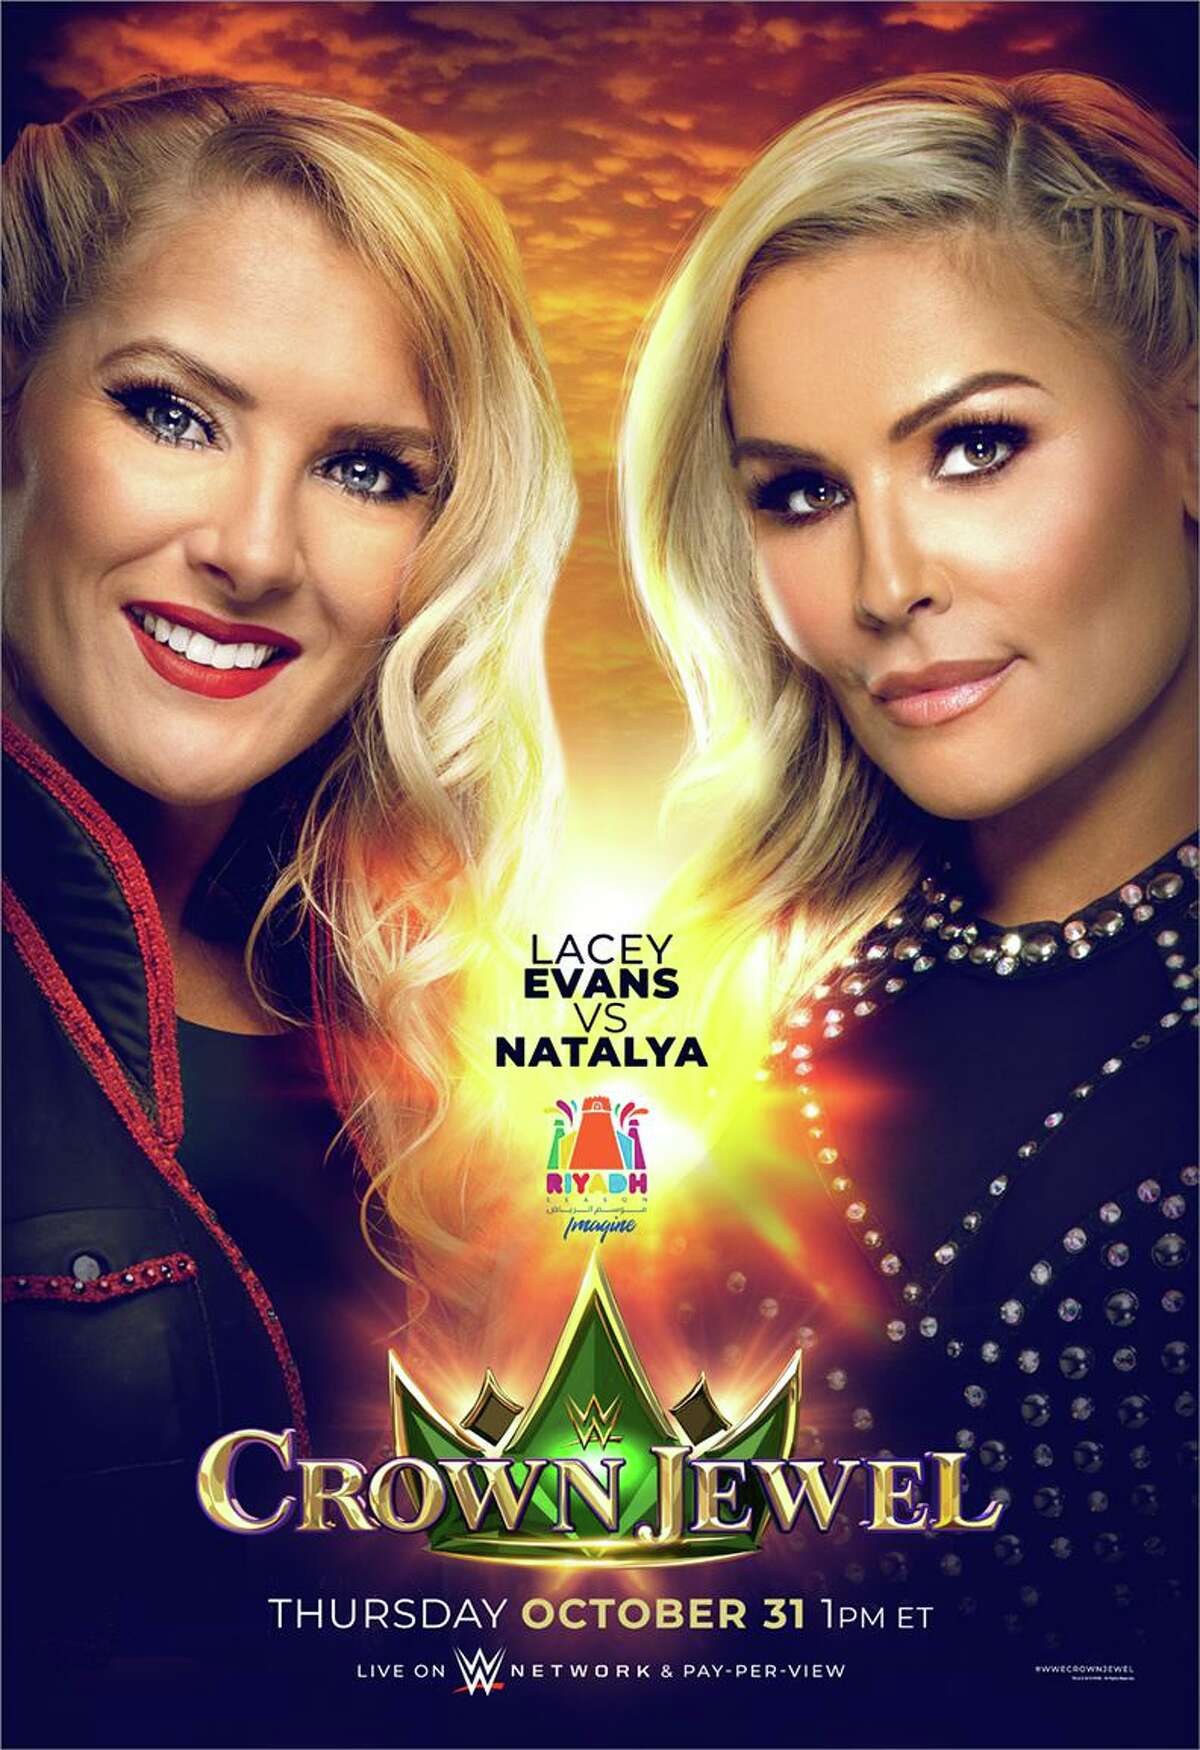 Superstars Lacey Evans and Natalya will perform in WWE’s first women’s match in Saudi Arabia, during the Crown Jewel show on Thursday, Oct. 31, 2019 in the Saudi capital Riyadh.